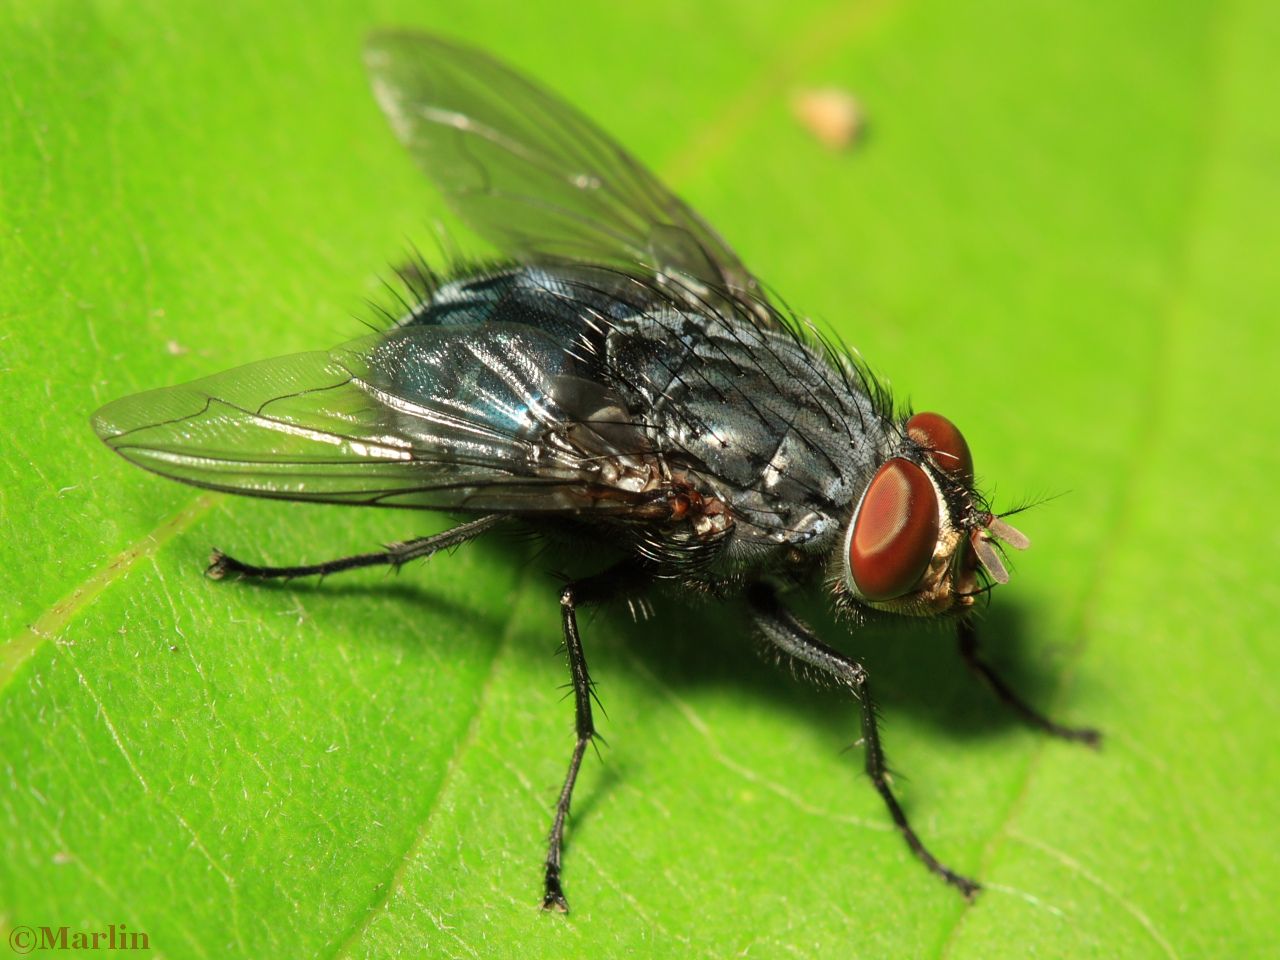 Blue Blow Fly, Calliphora vicina